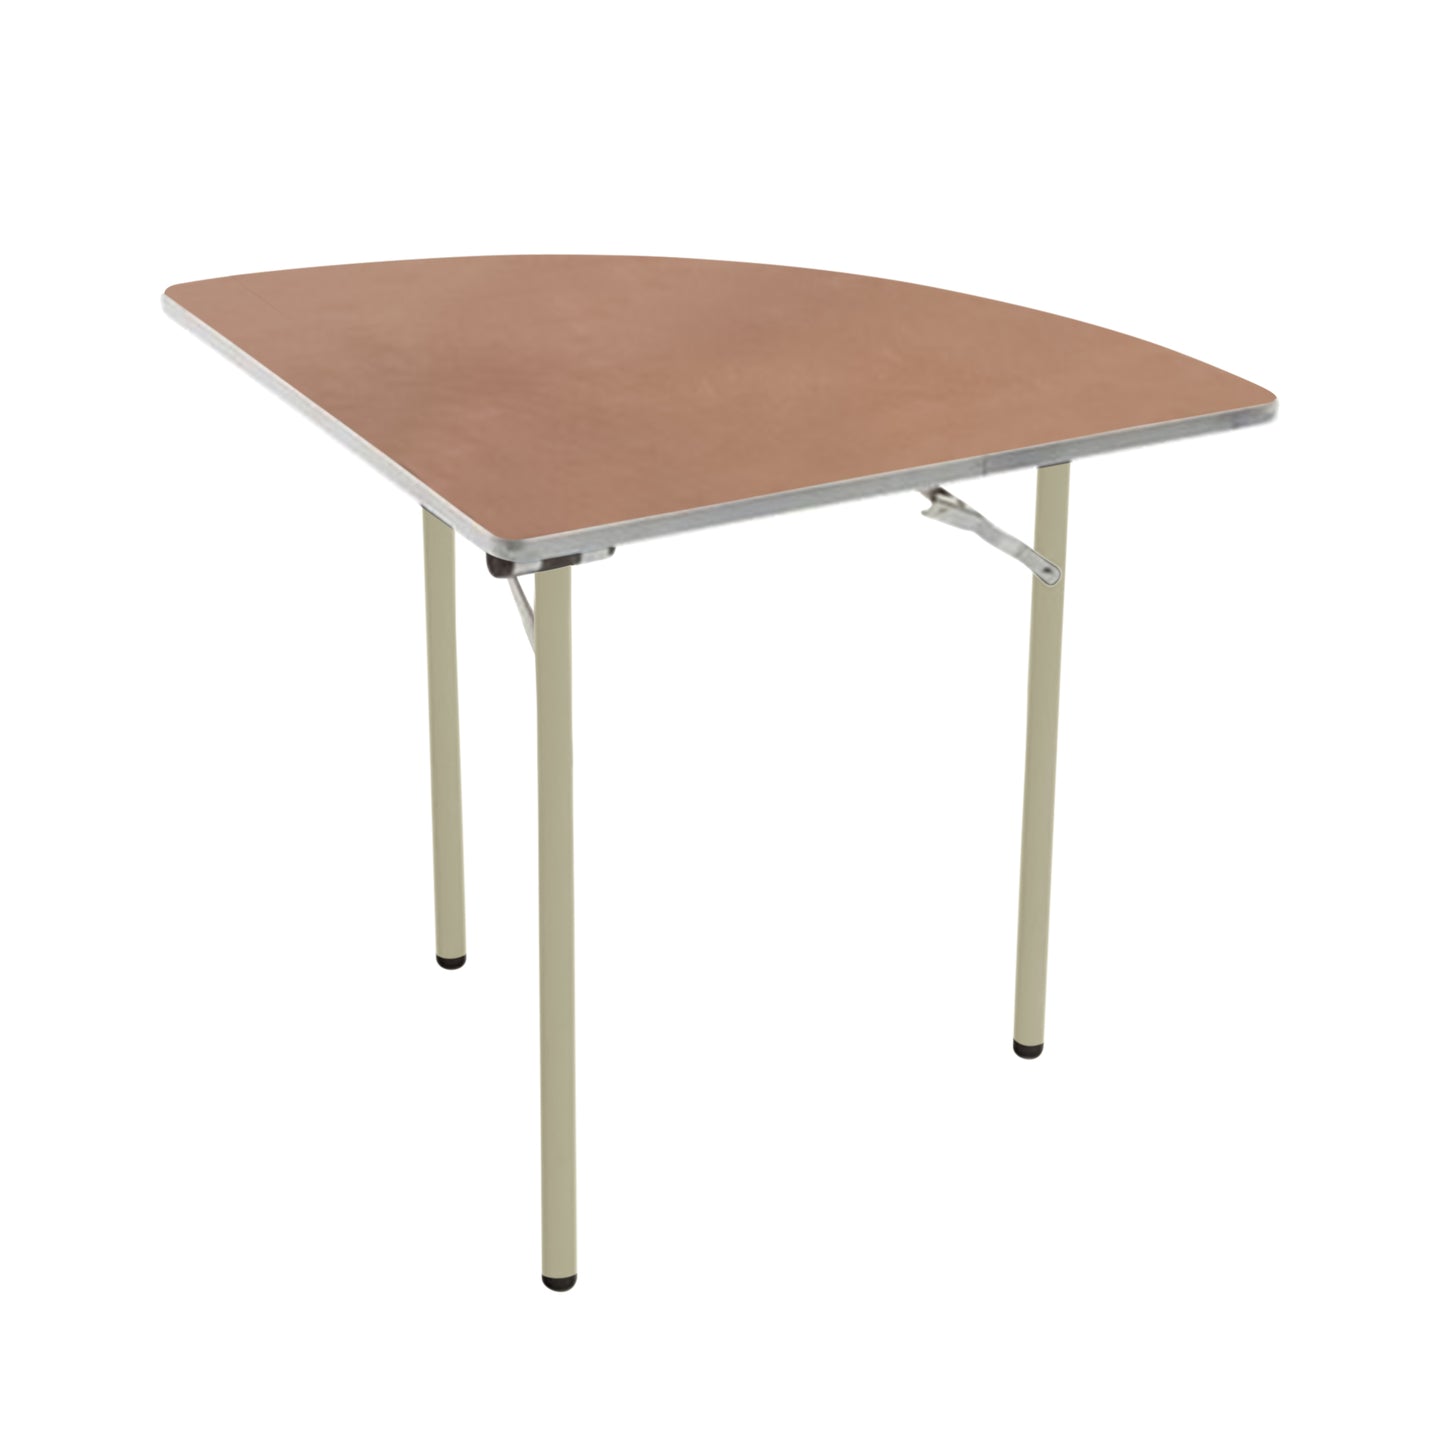 AmTab Folding Table - Plywood Stained and Sealed - Aluminum Edge - Quarter Round - Quarter 48" Diameter x 29"H  (AmTab AMT-QR48PA)